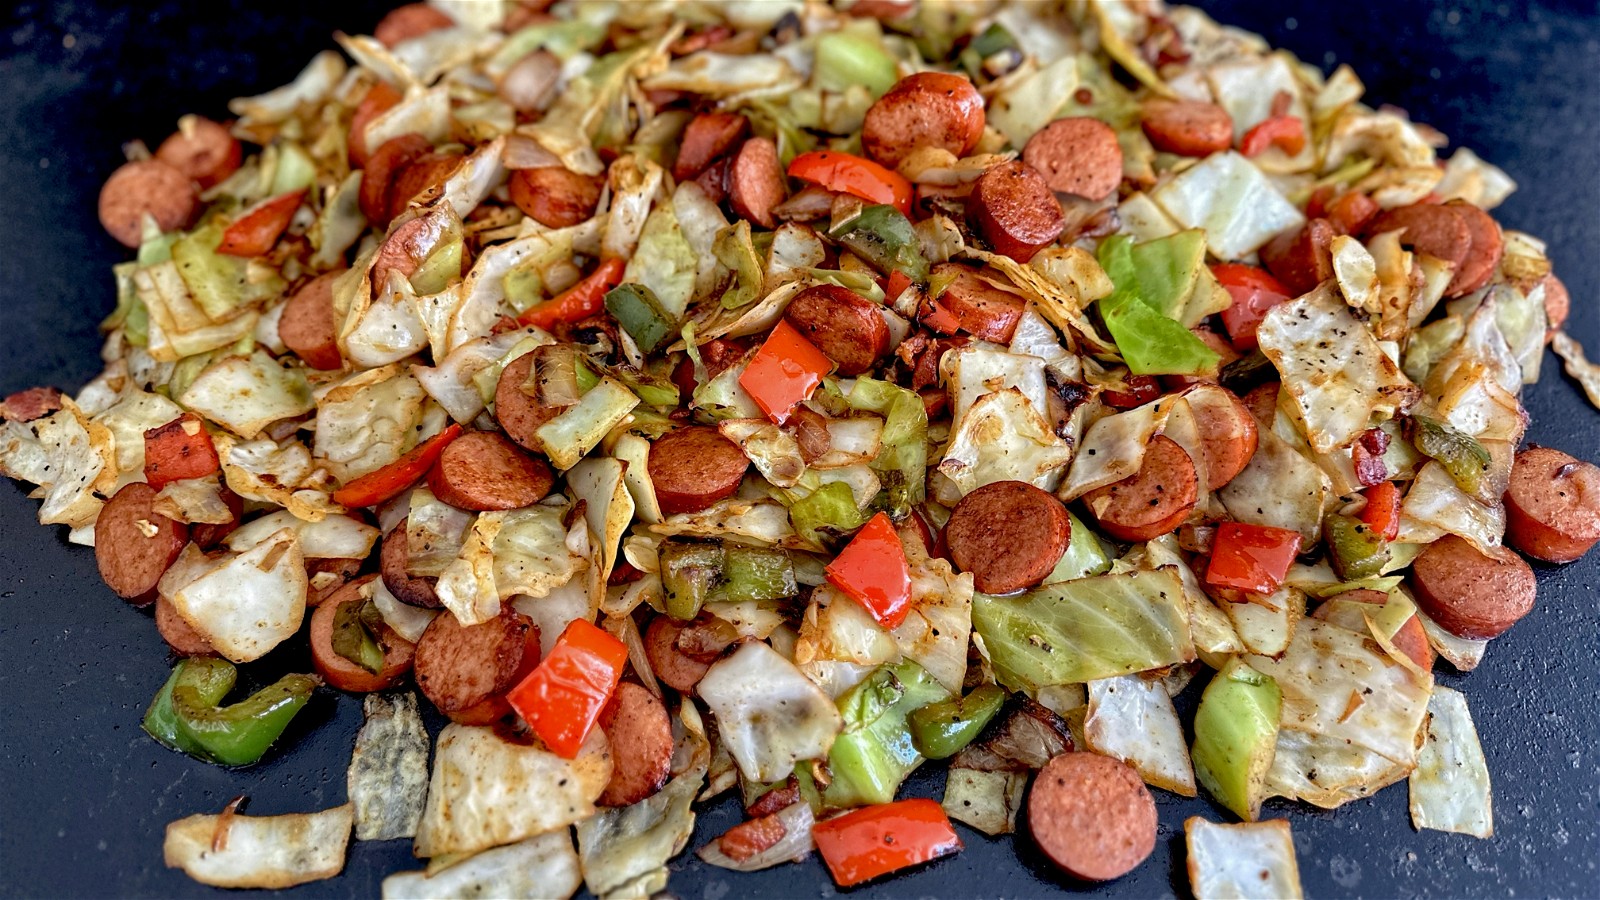 Image of Fried Cabbage